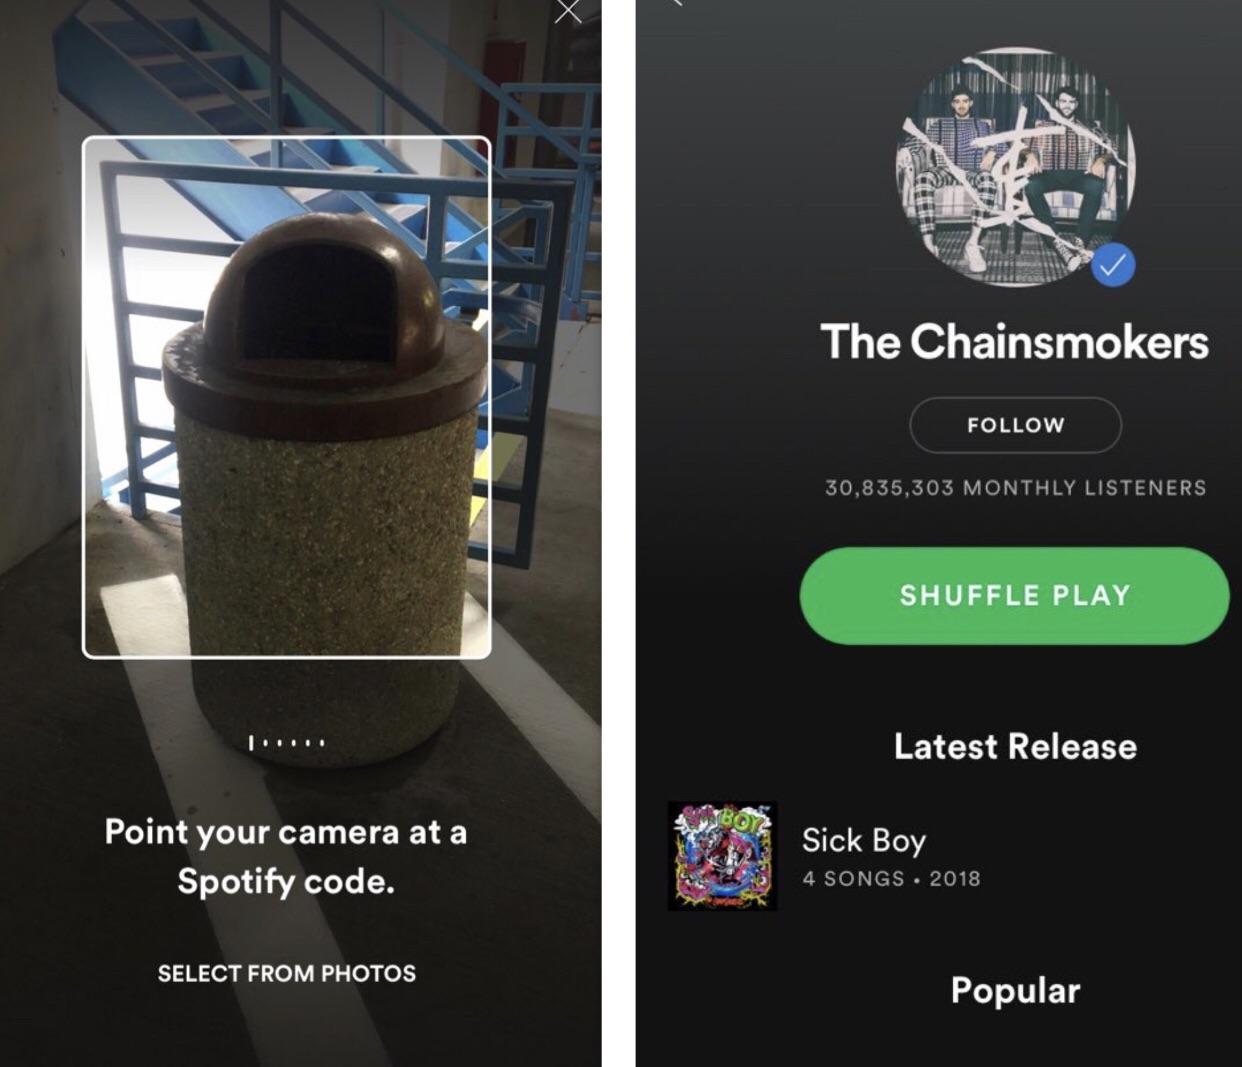 New Spotify feature is pretty neat.